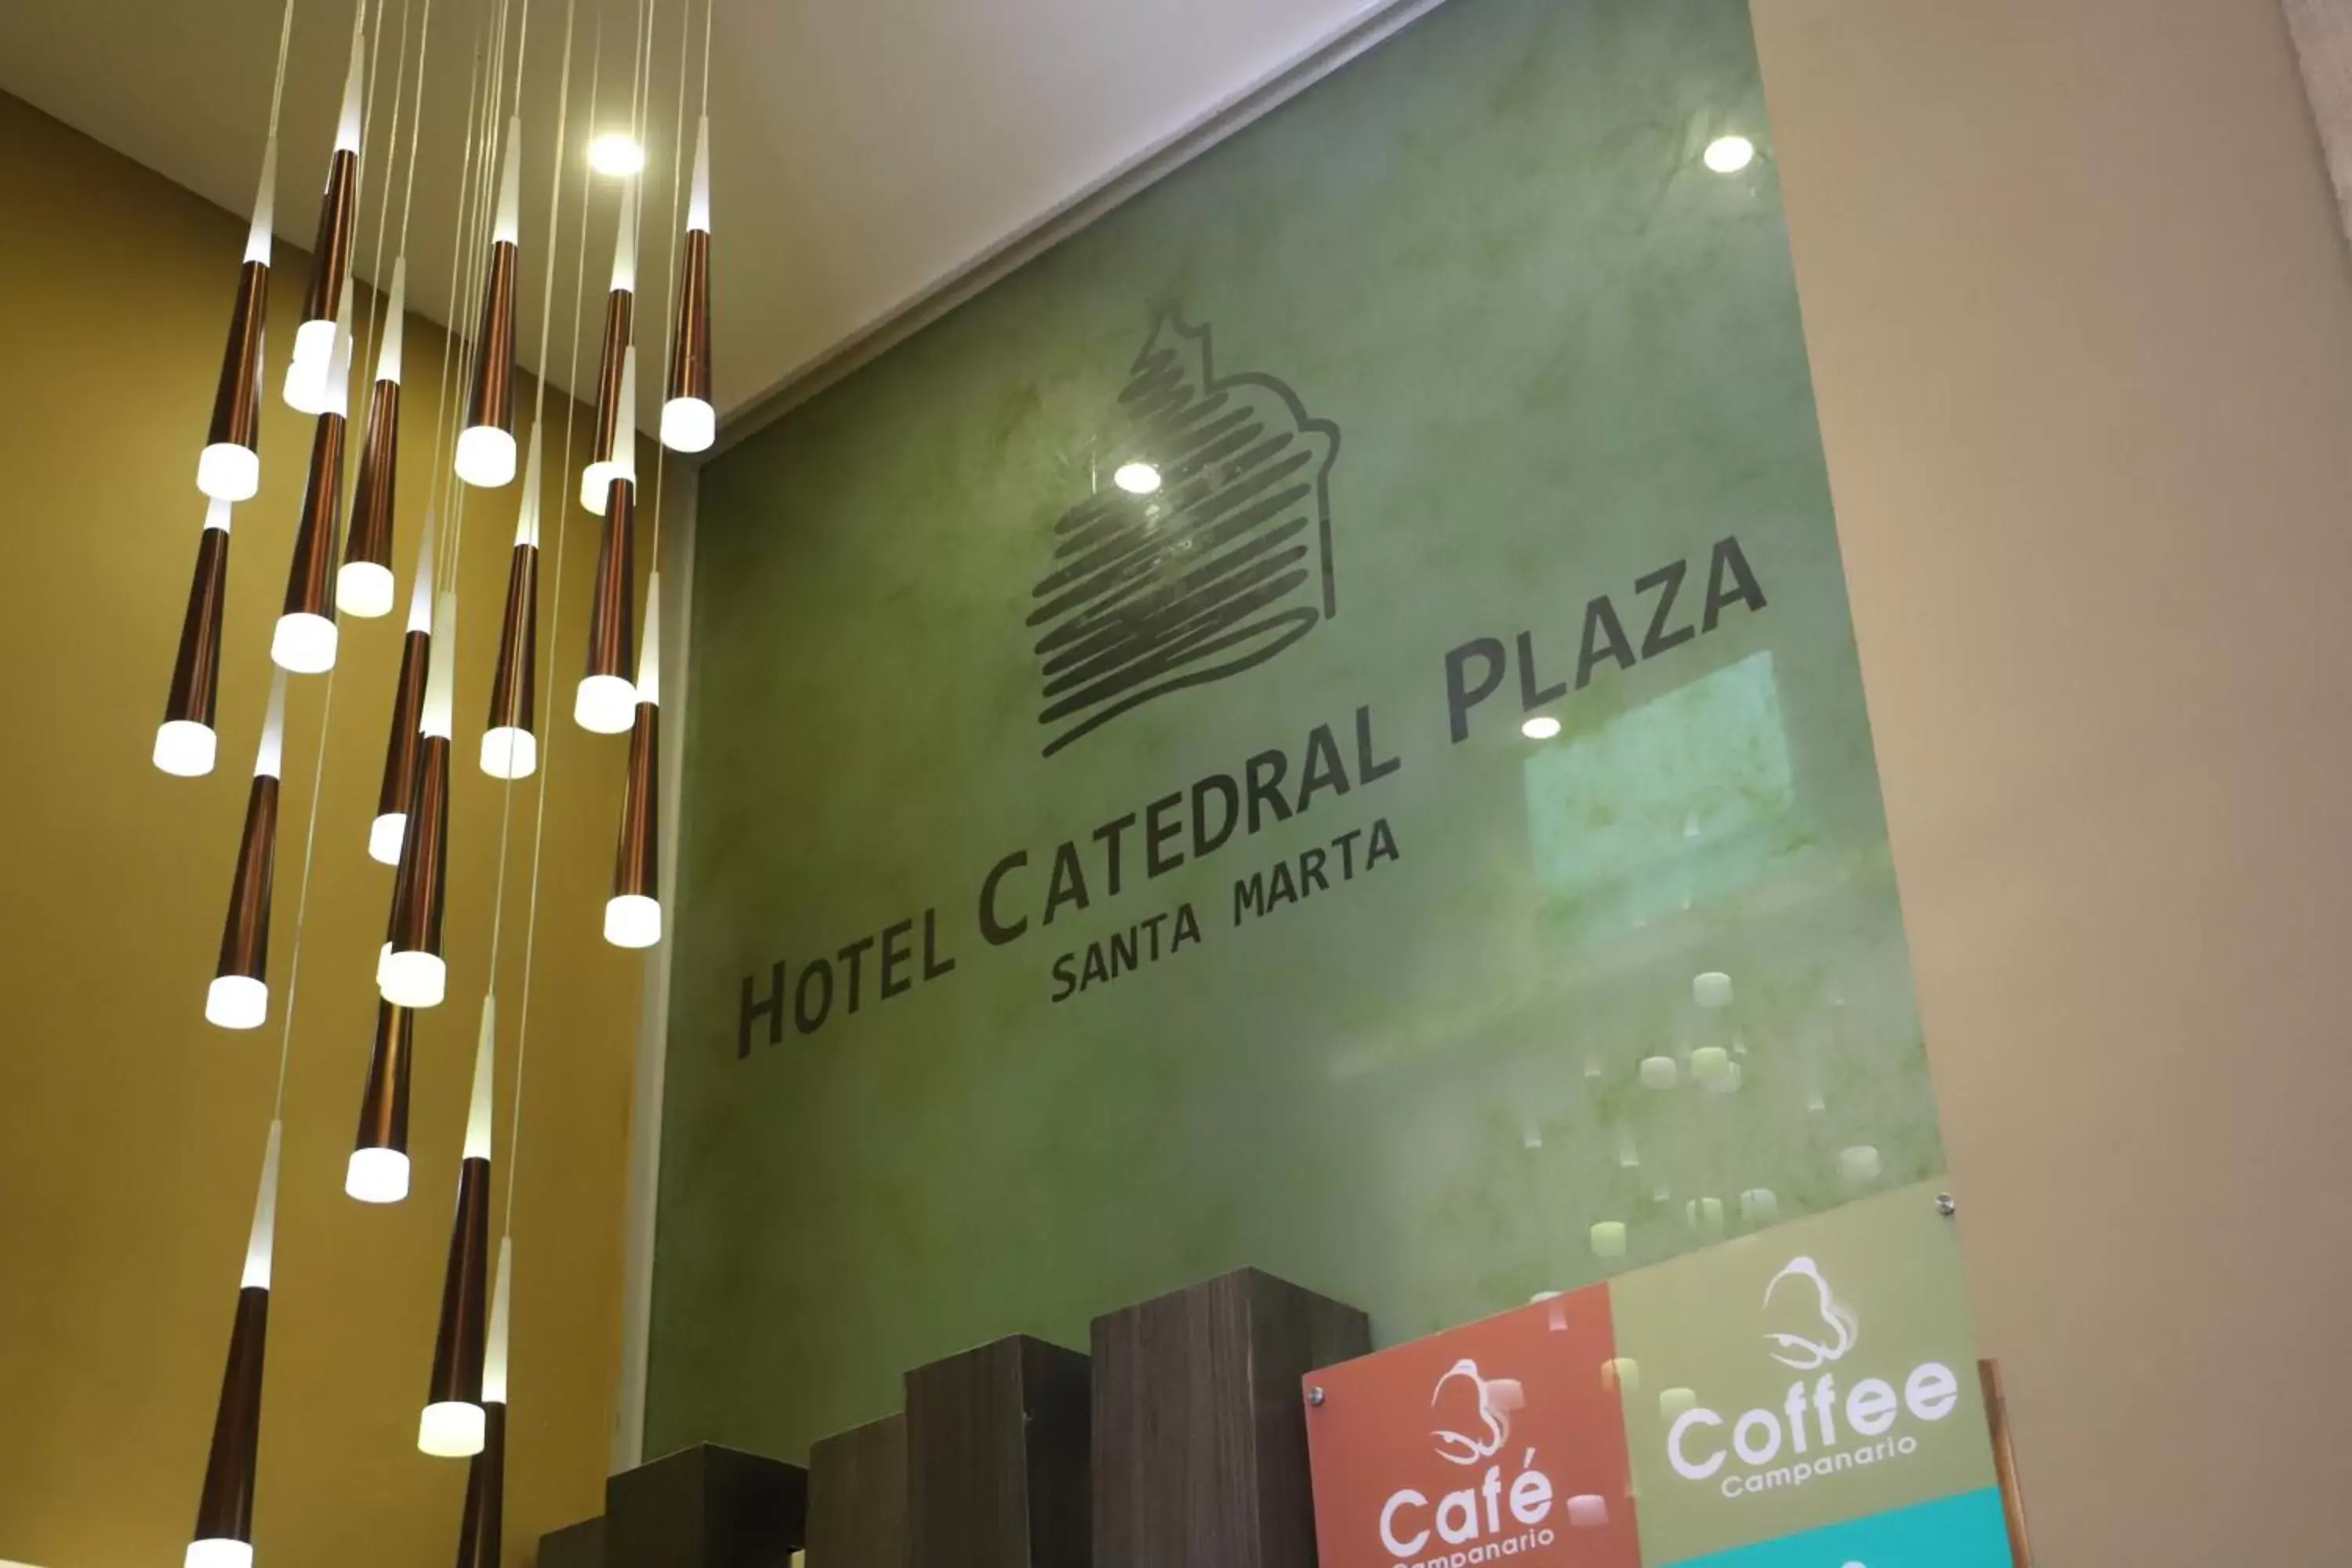 Property logo or sign in Hotel Catedral Plaza